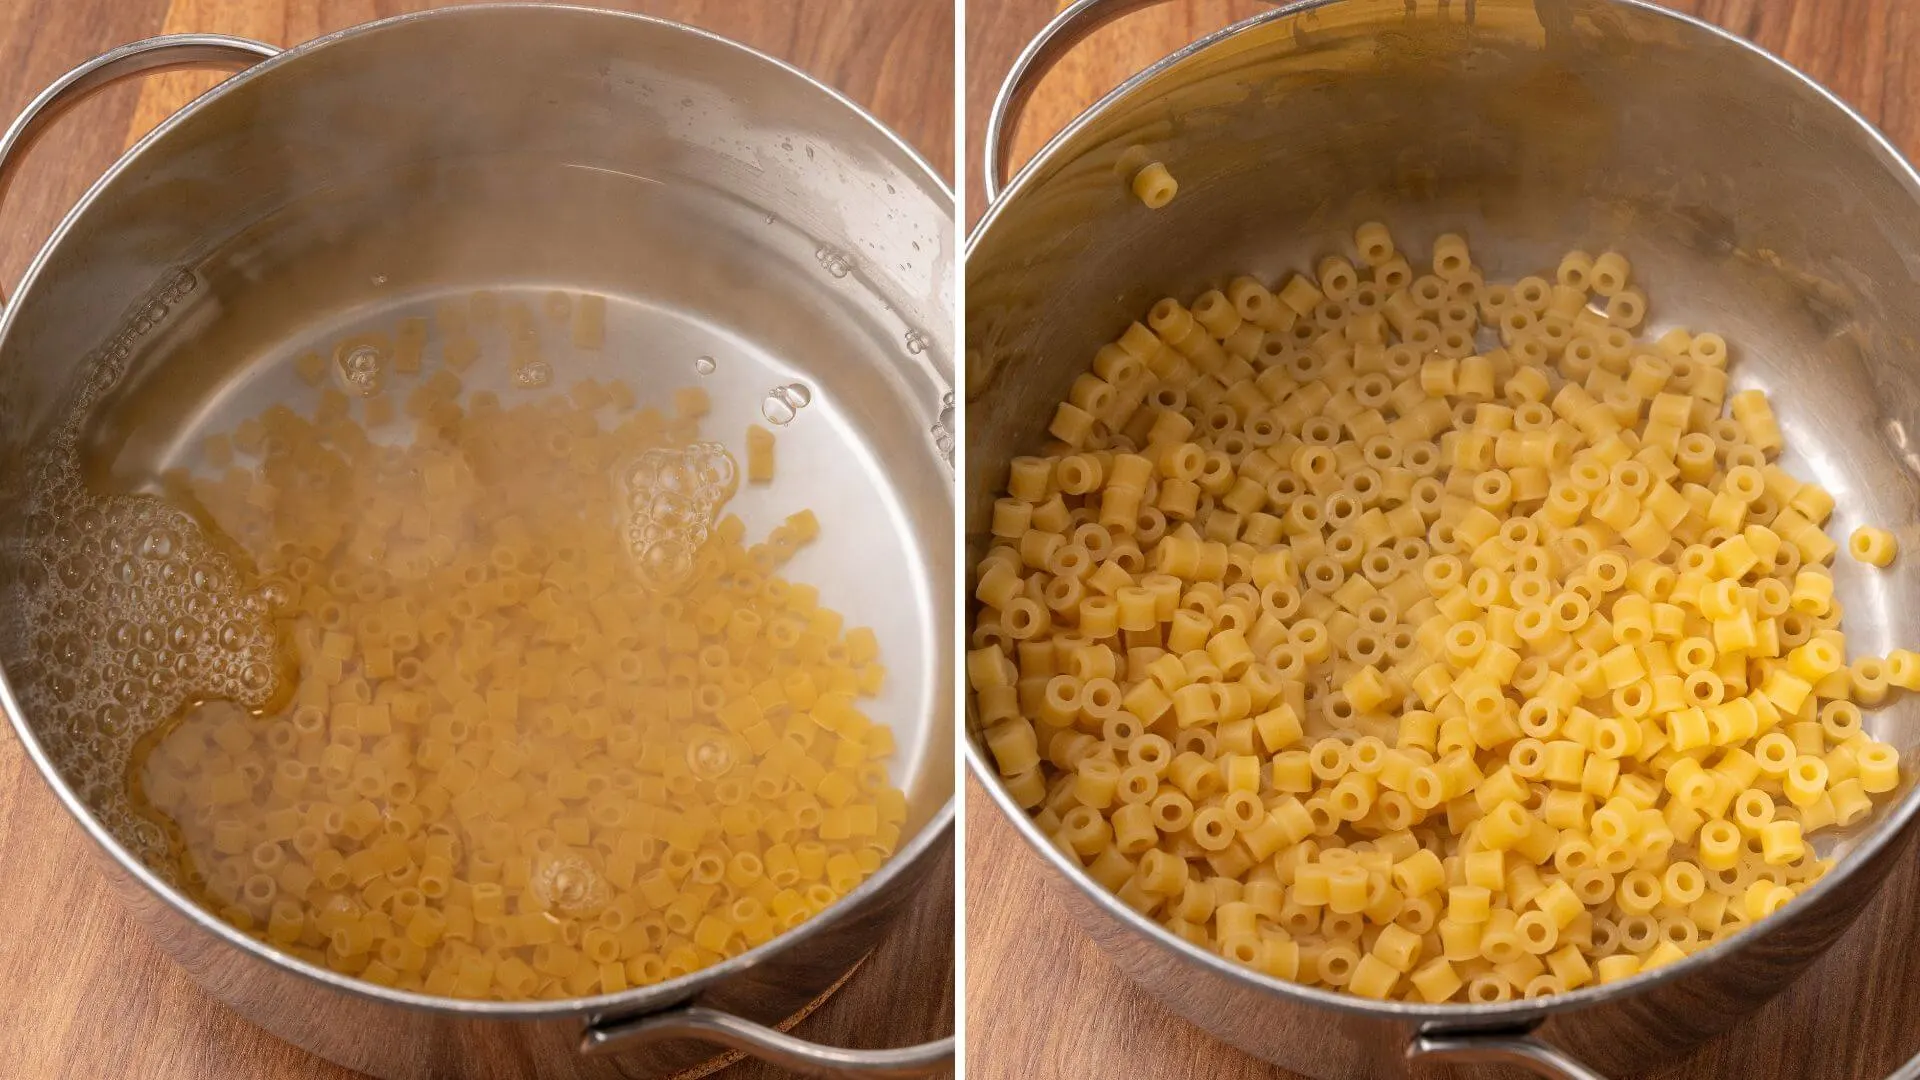 The ditalini pasta is boiled and drained.